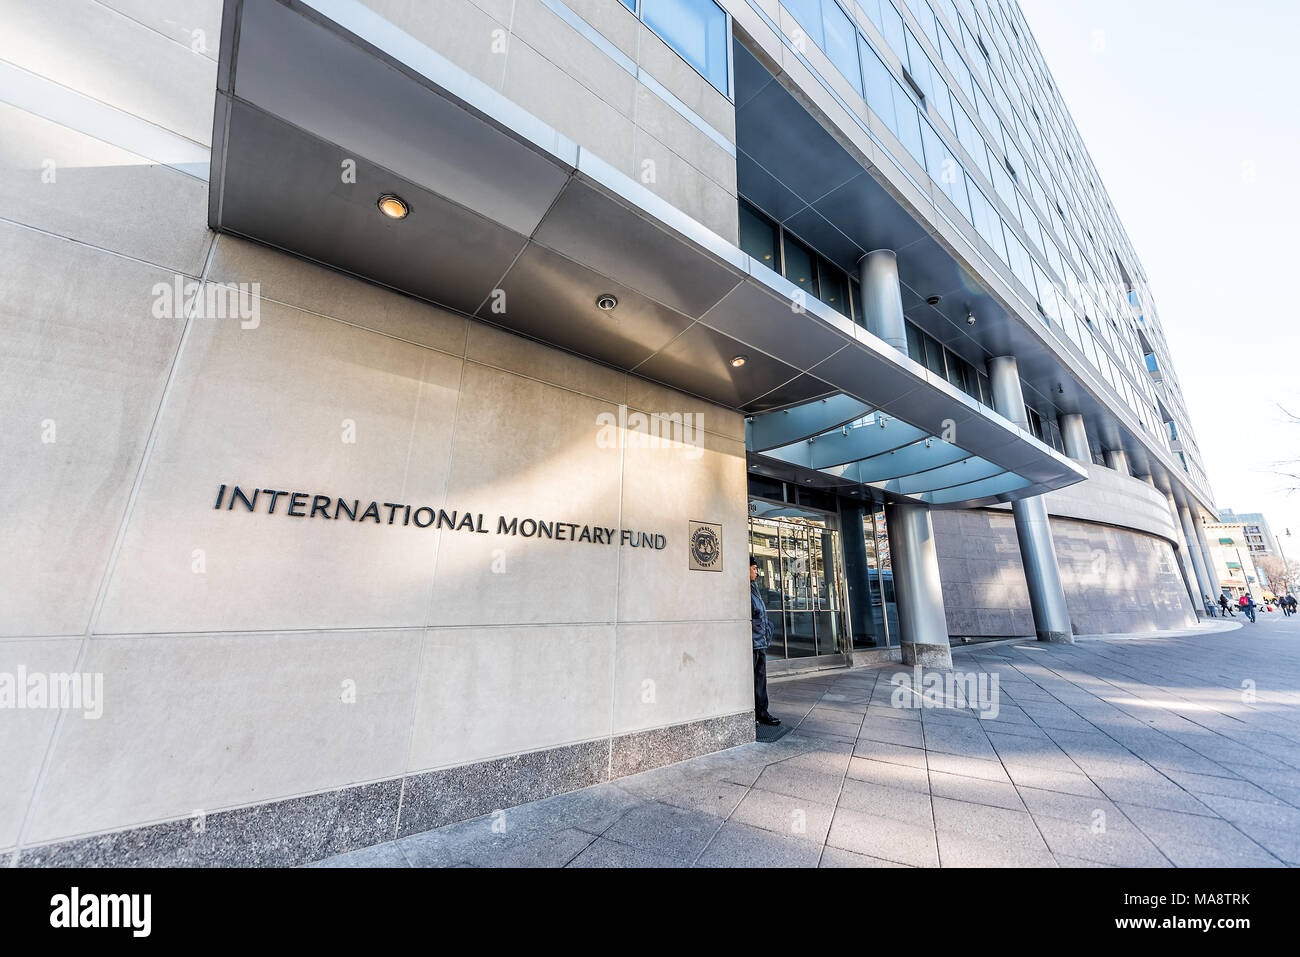 Washington DC, USA - March 9, 2018: IMF entrance with sign of International Monetary Fund, concrete architecture building wall security guard doors Stock Photo